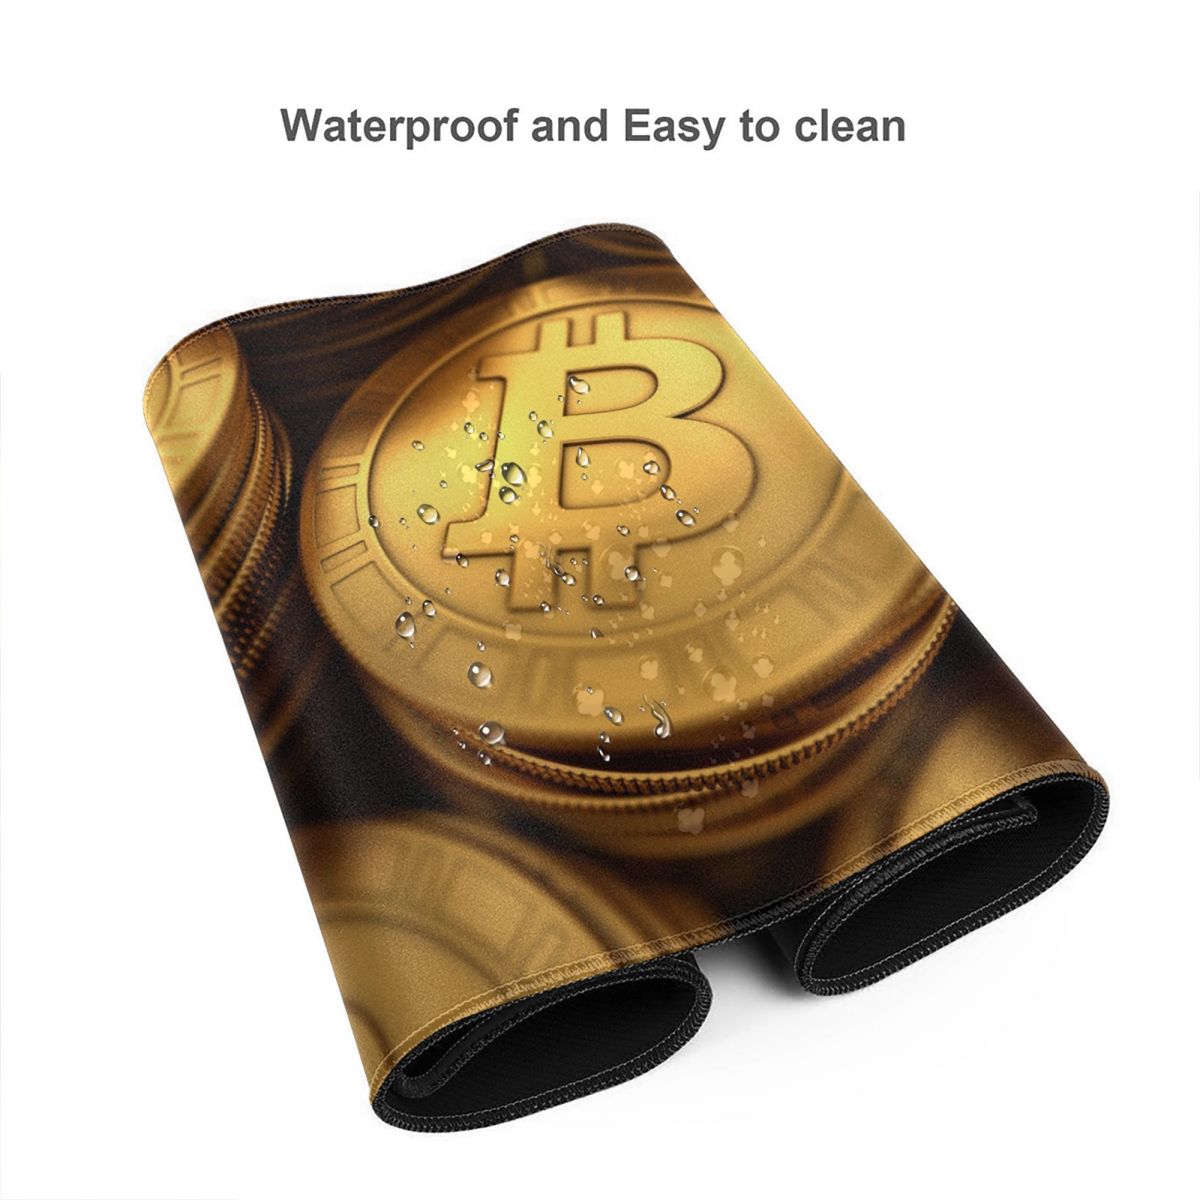 Bitcoin BTC Cryptocurrency Gaming Mouse Pad Keyboard Desk Mat